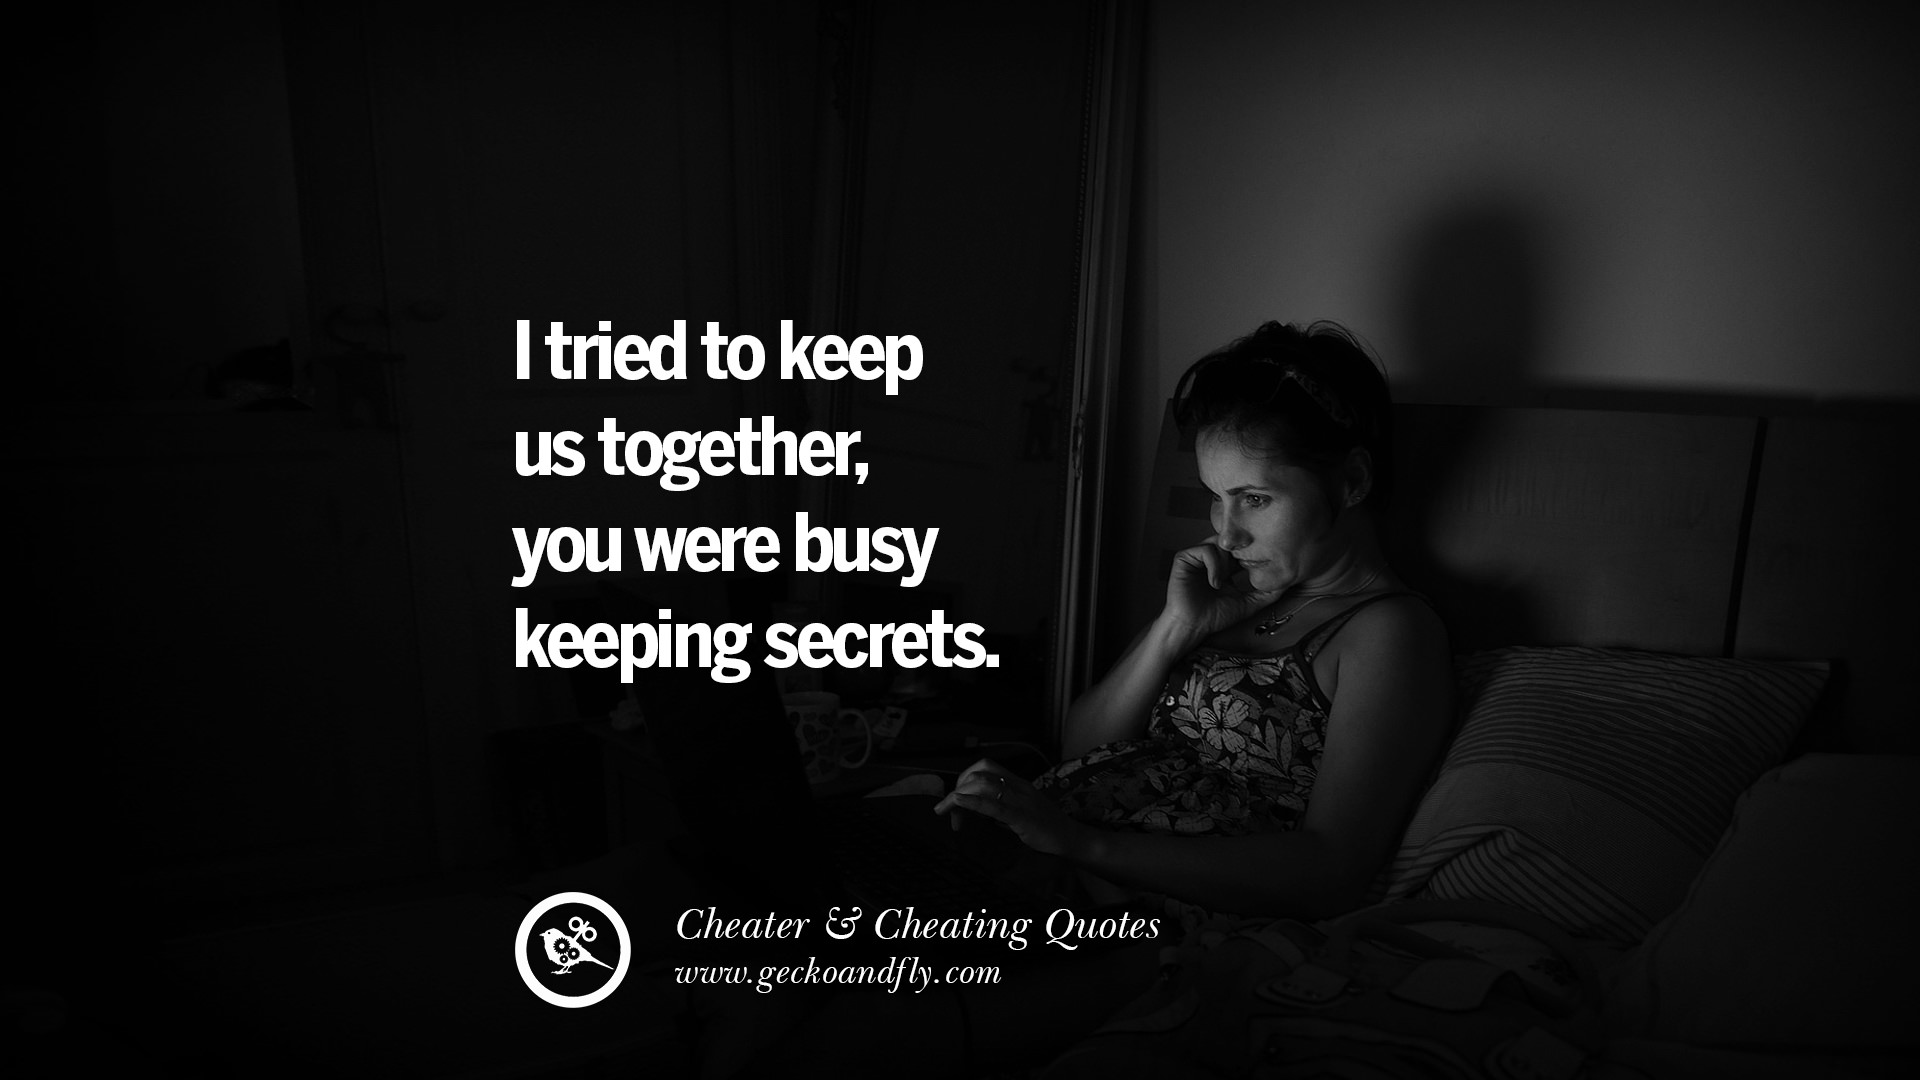 60 Quotes On Cheating Boyfriend And Lying Husband